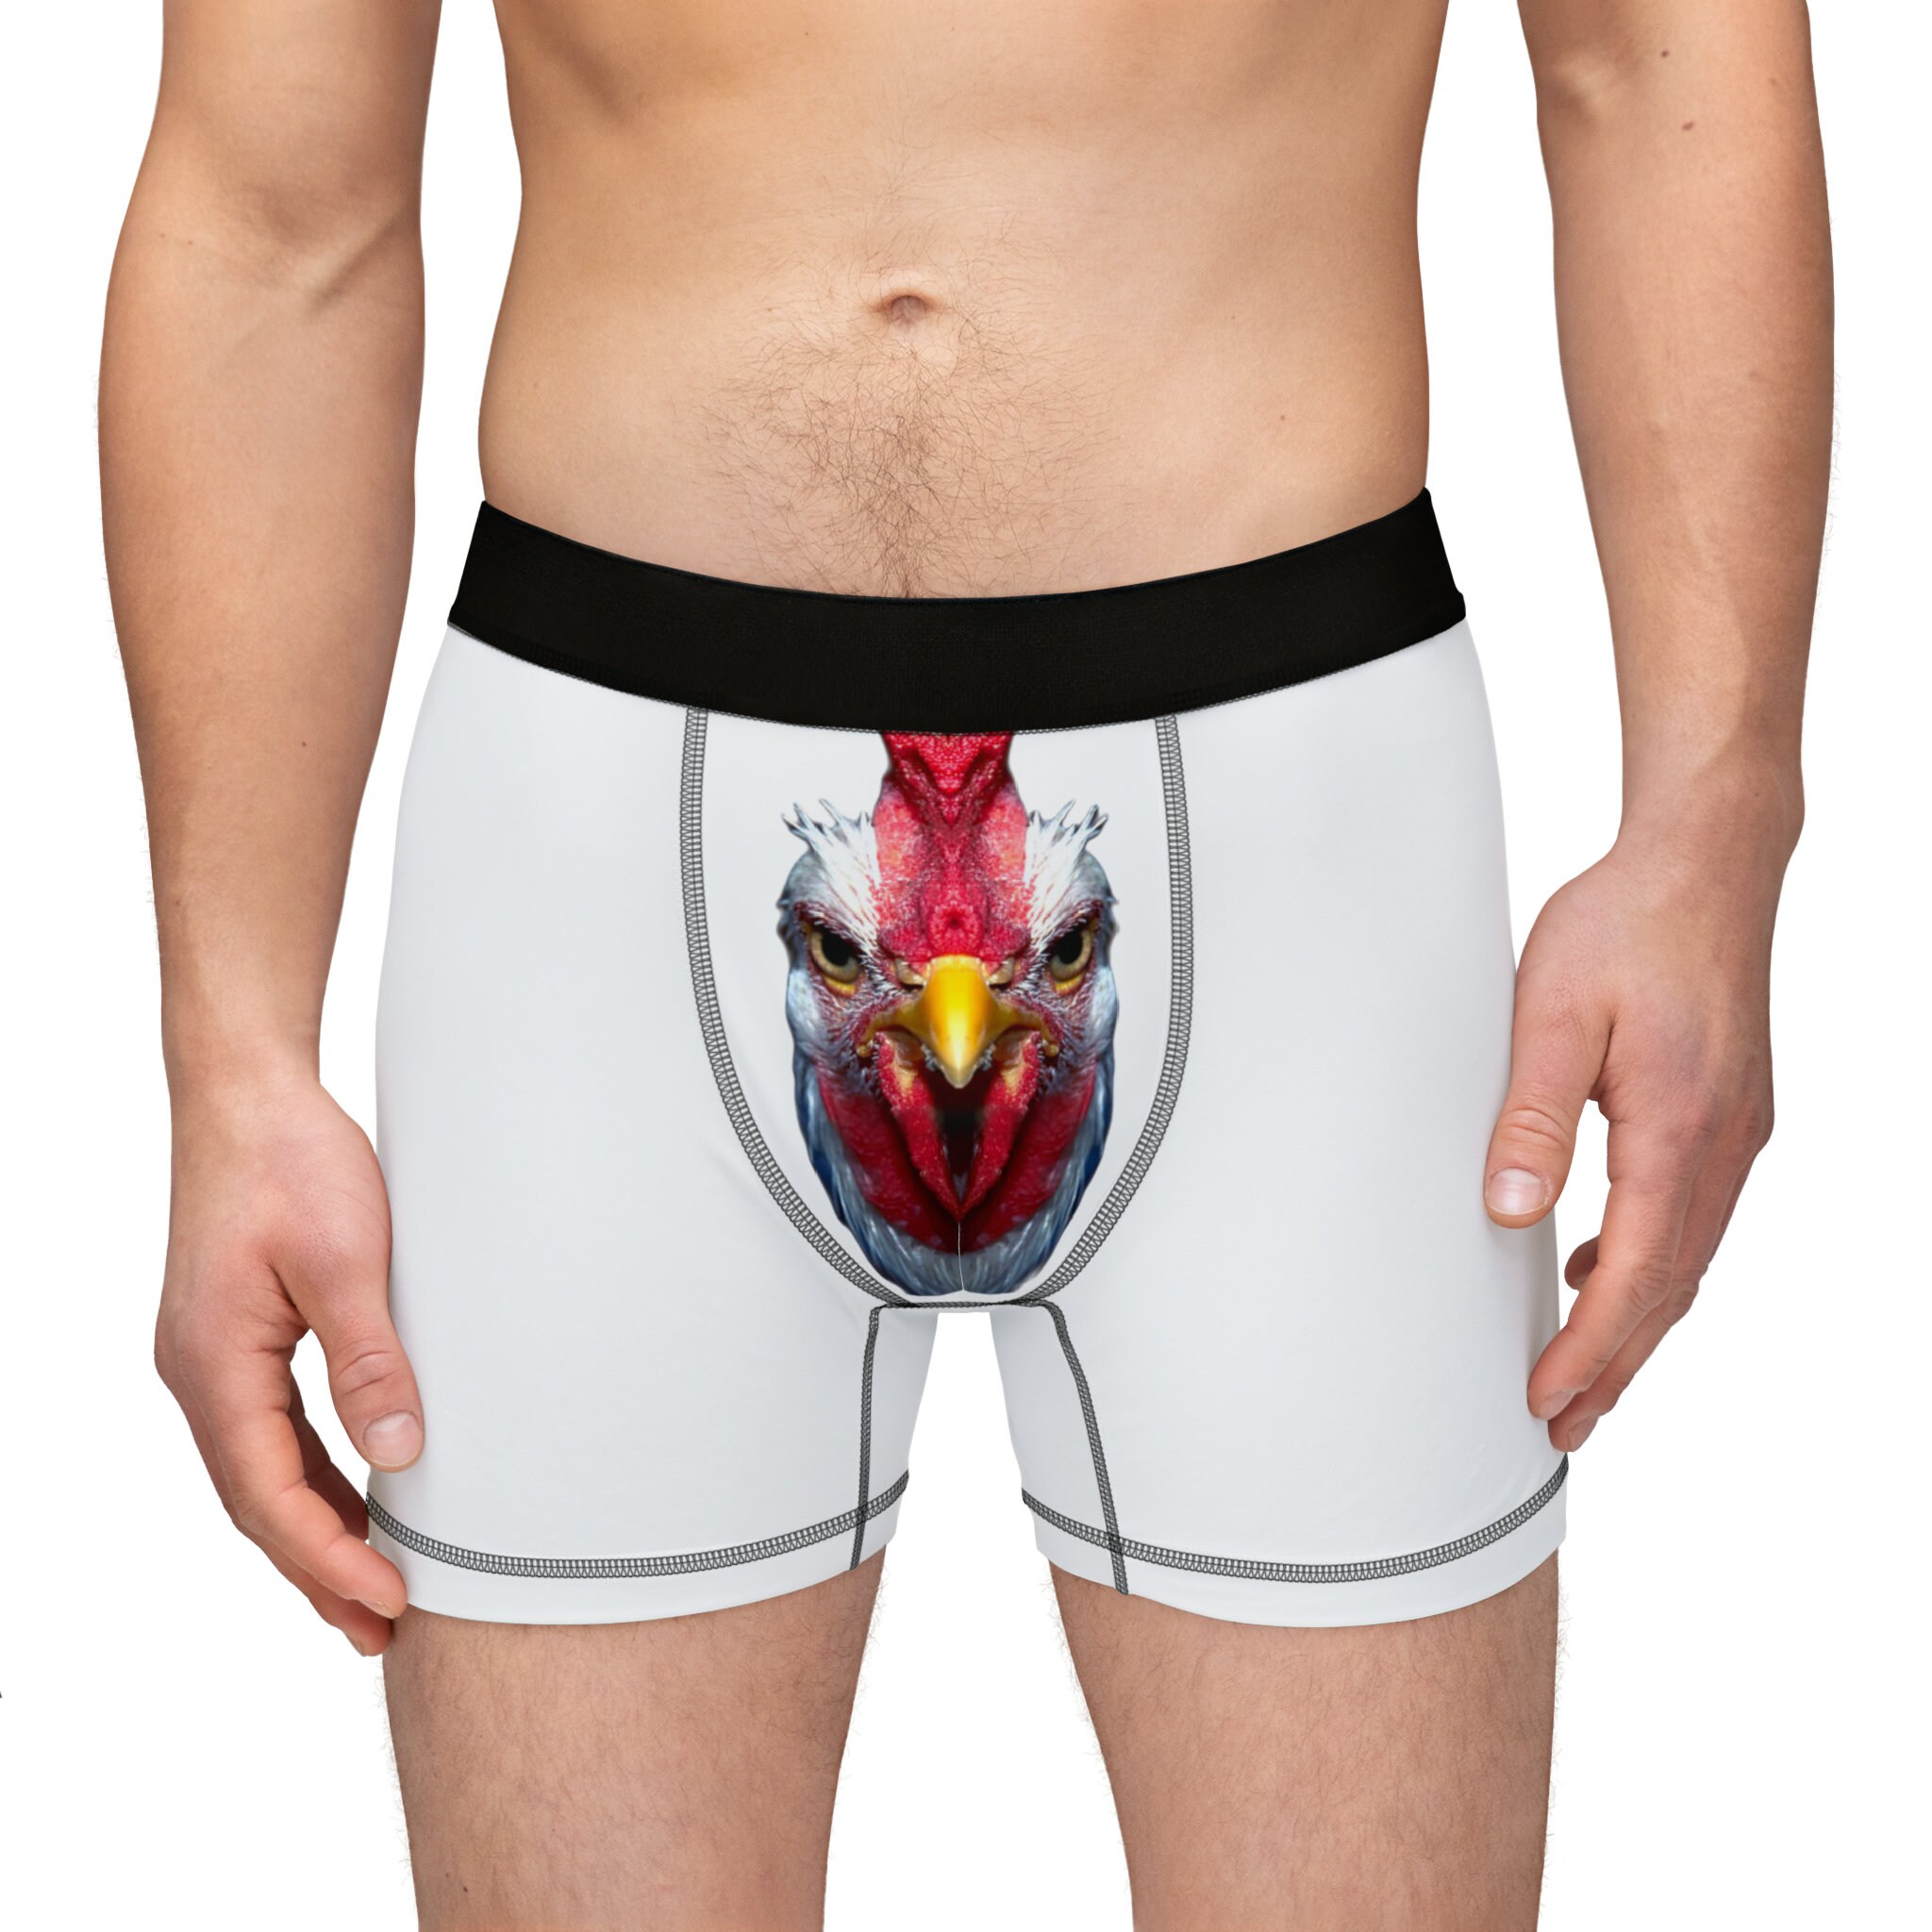 Funny Men's Boxers, Funny Gift For Him